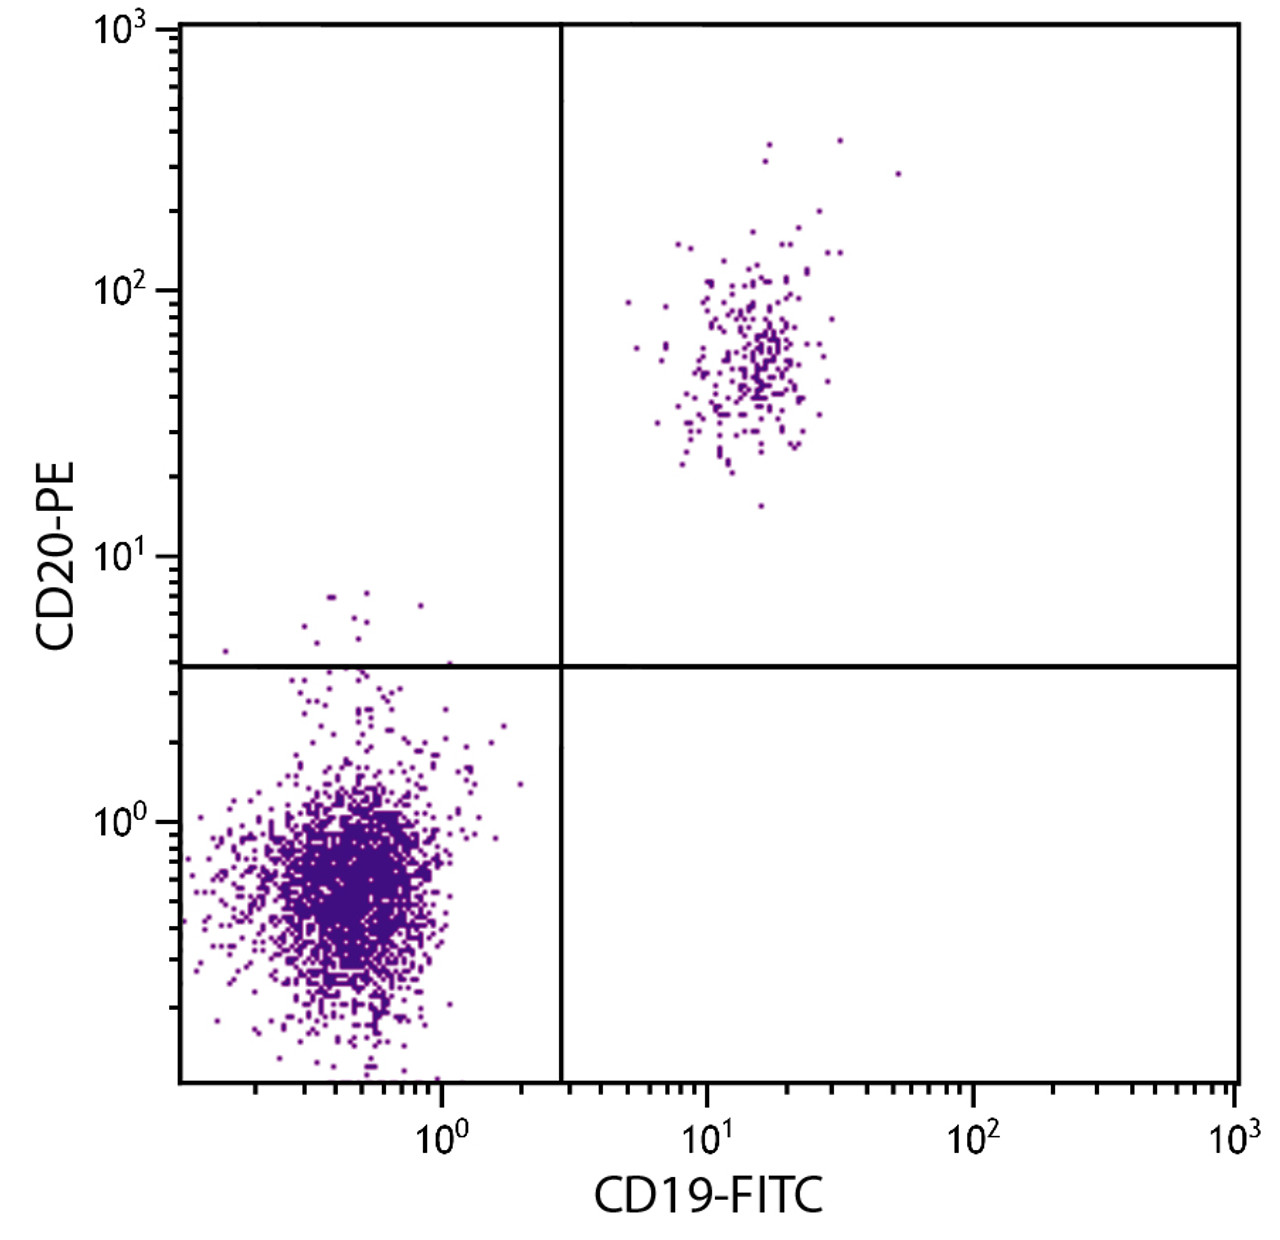 Human peripheral blood lymphocytes were stained with Mouse Anti-Human CD20-PE (Cat. No. 99-366) and Mouse Anti-Human CD19-FITC .